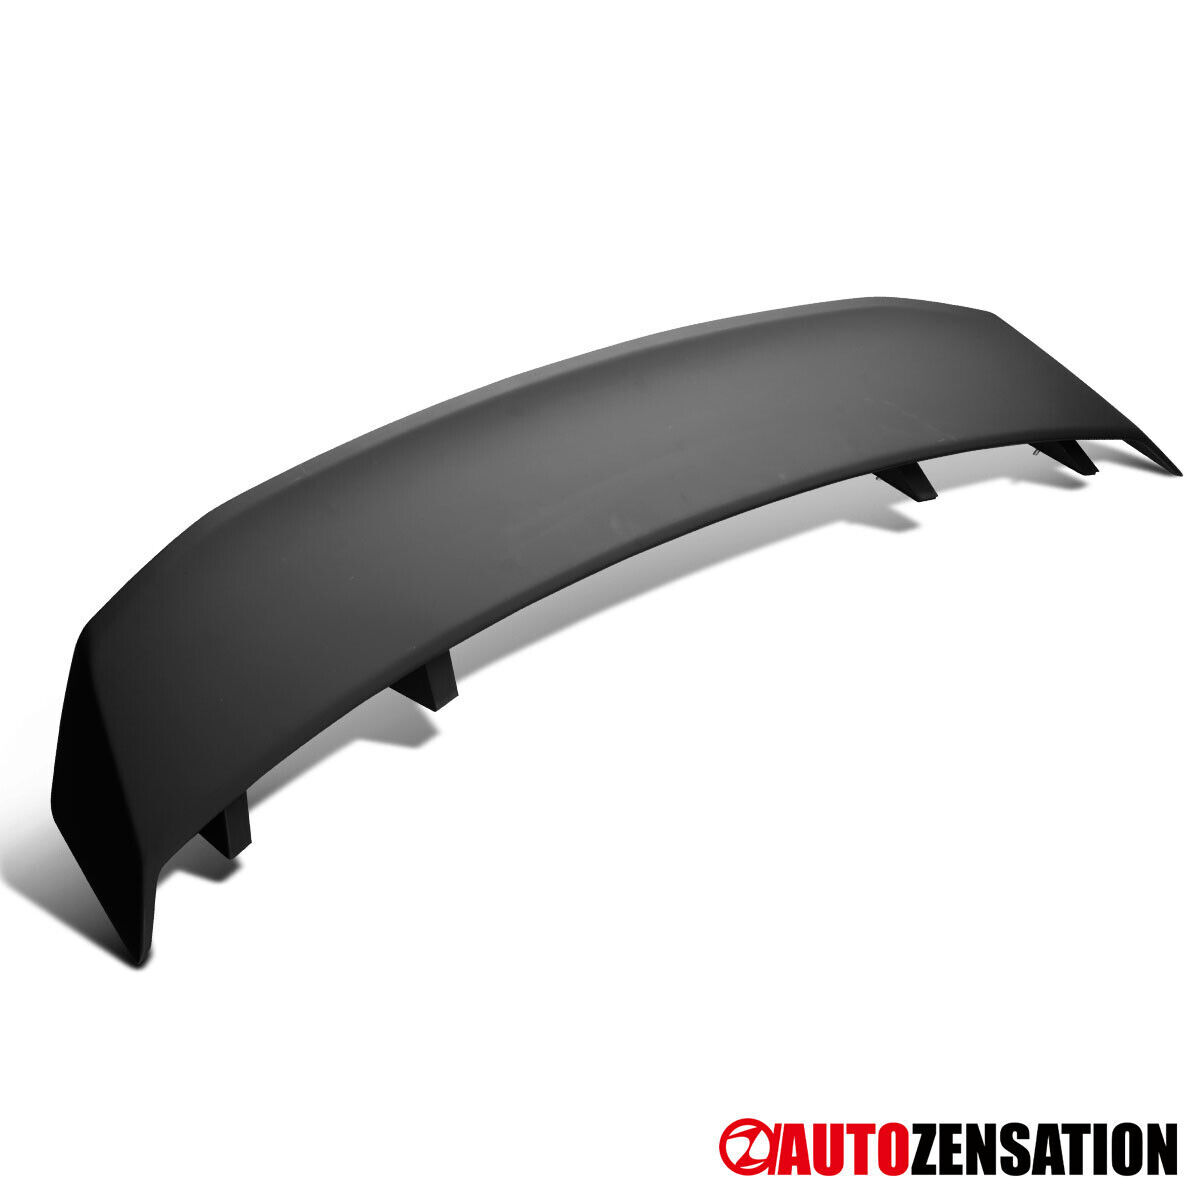 Fit 2010-2014 Ford Mustang GT Shelby Black Pedestal Style Trunk Spoiler Wing